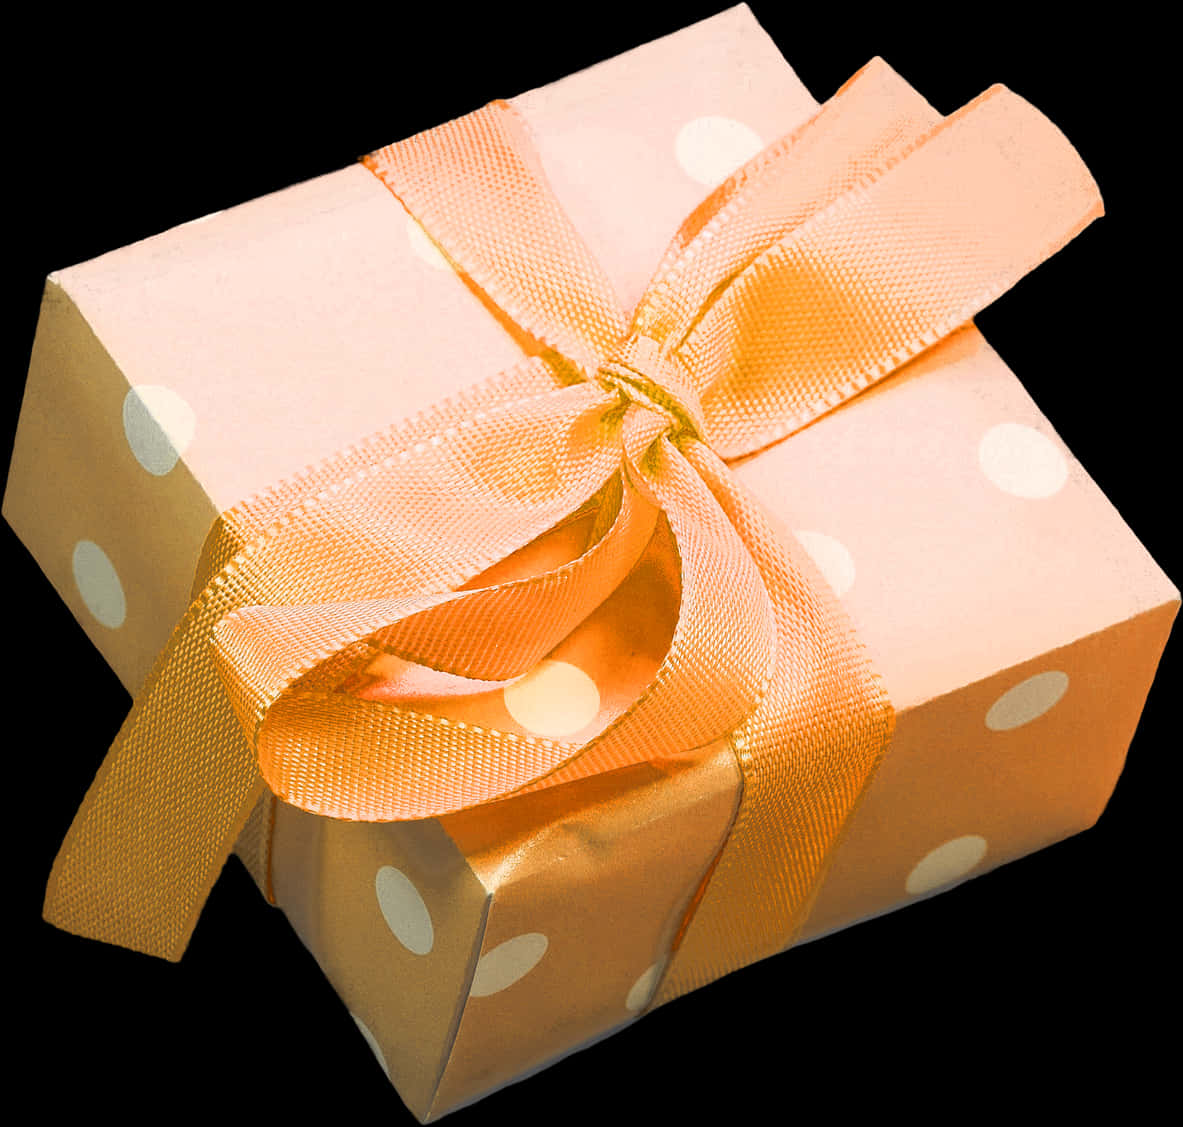 A Box Wrapped In Paper With A Bow